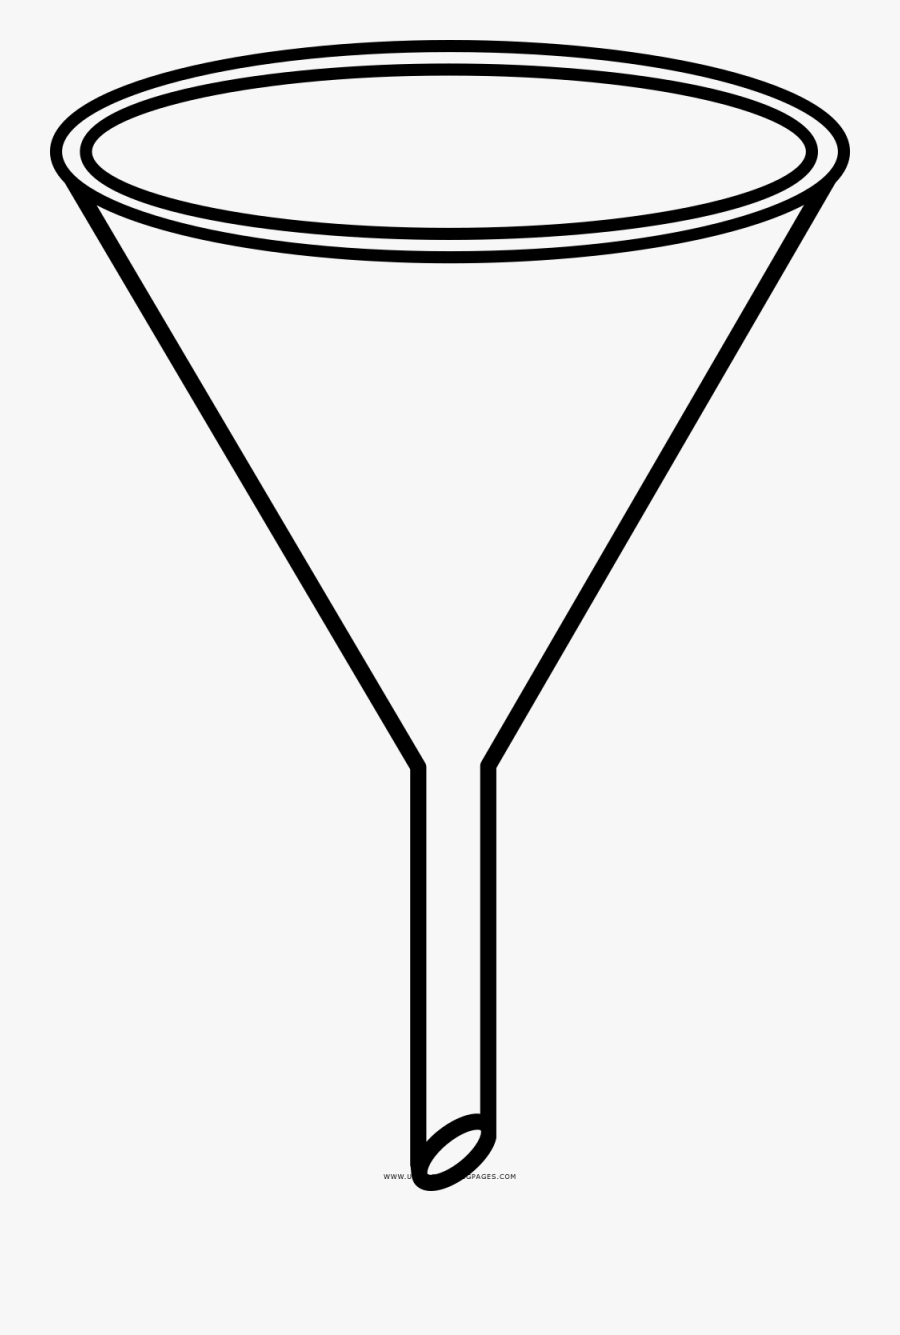 Funnel Coloring Page, Transparent Clipart